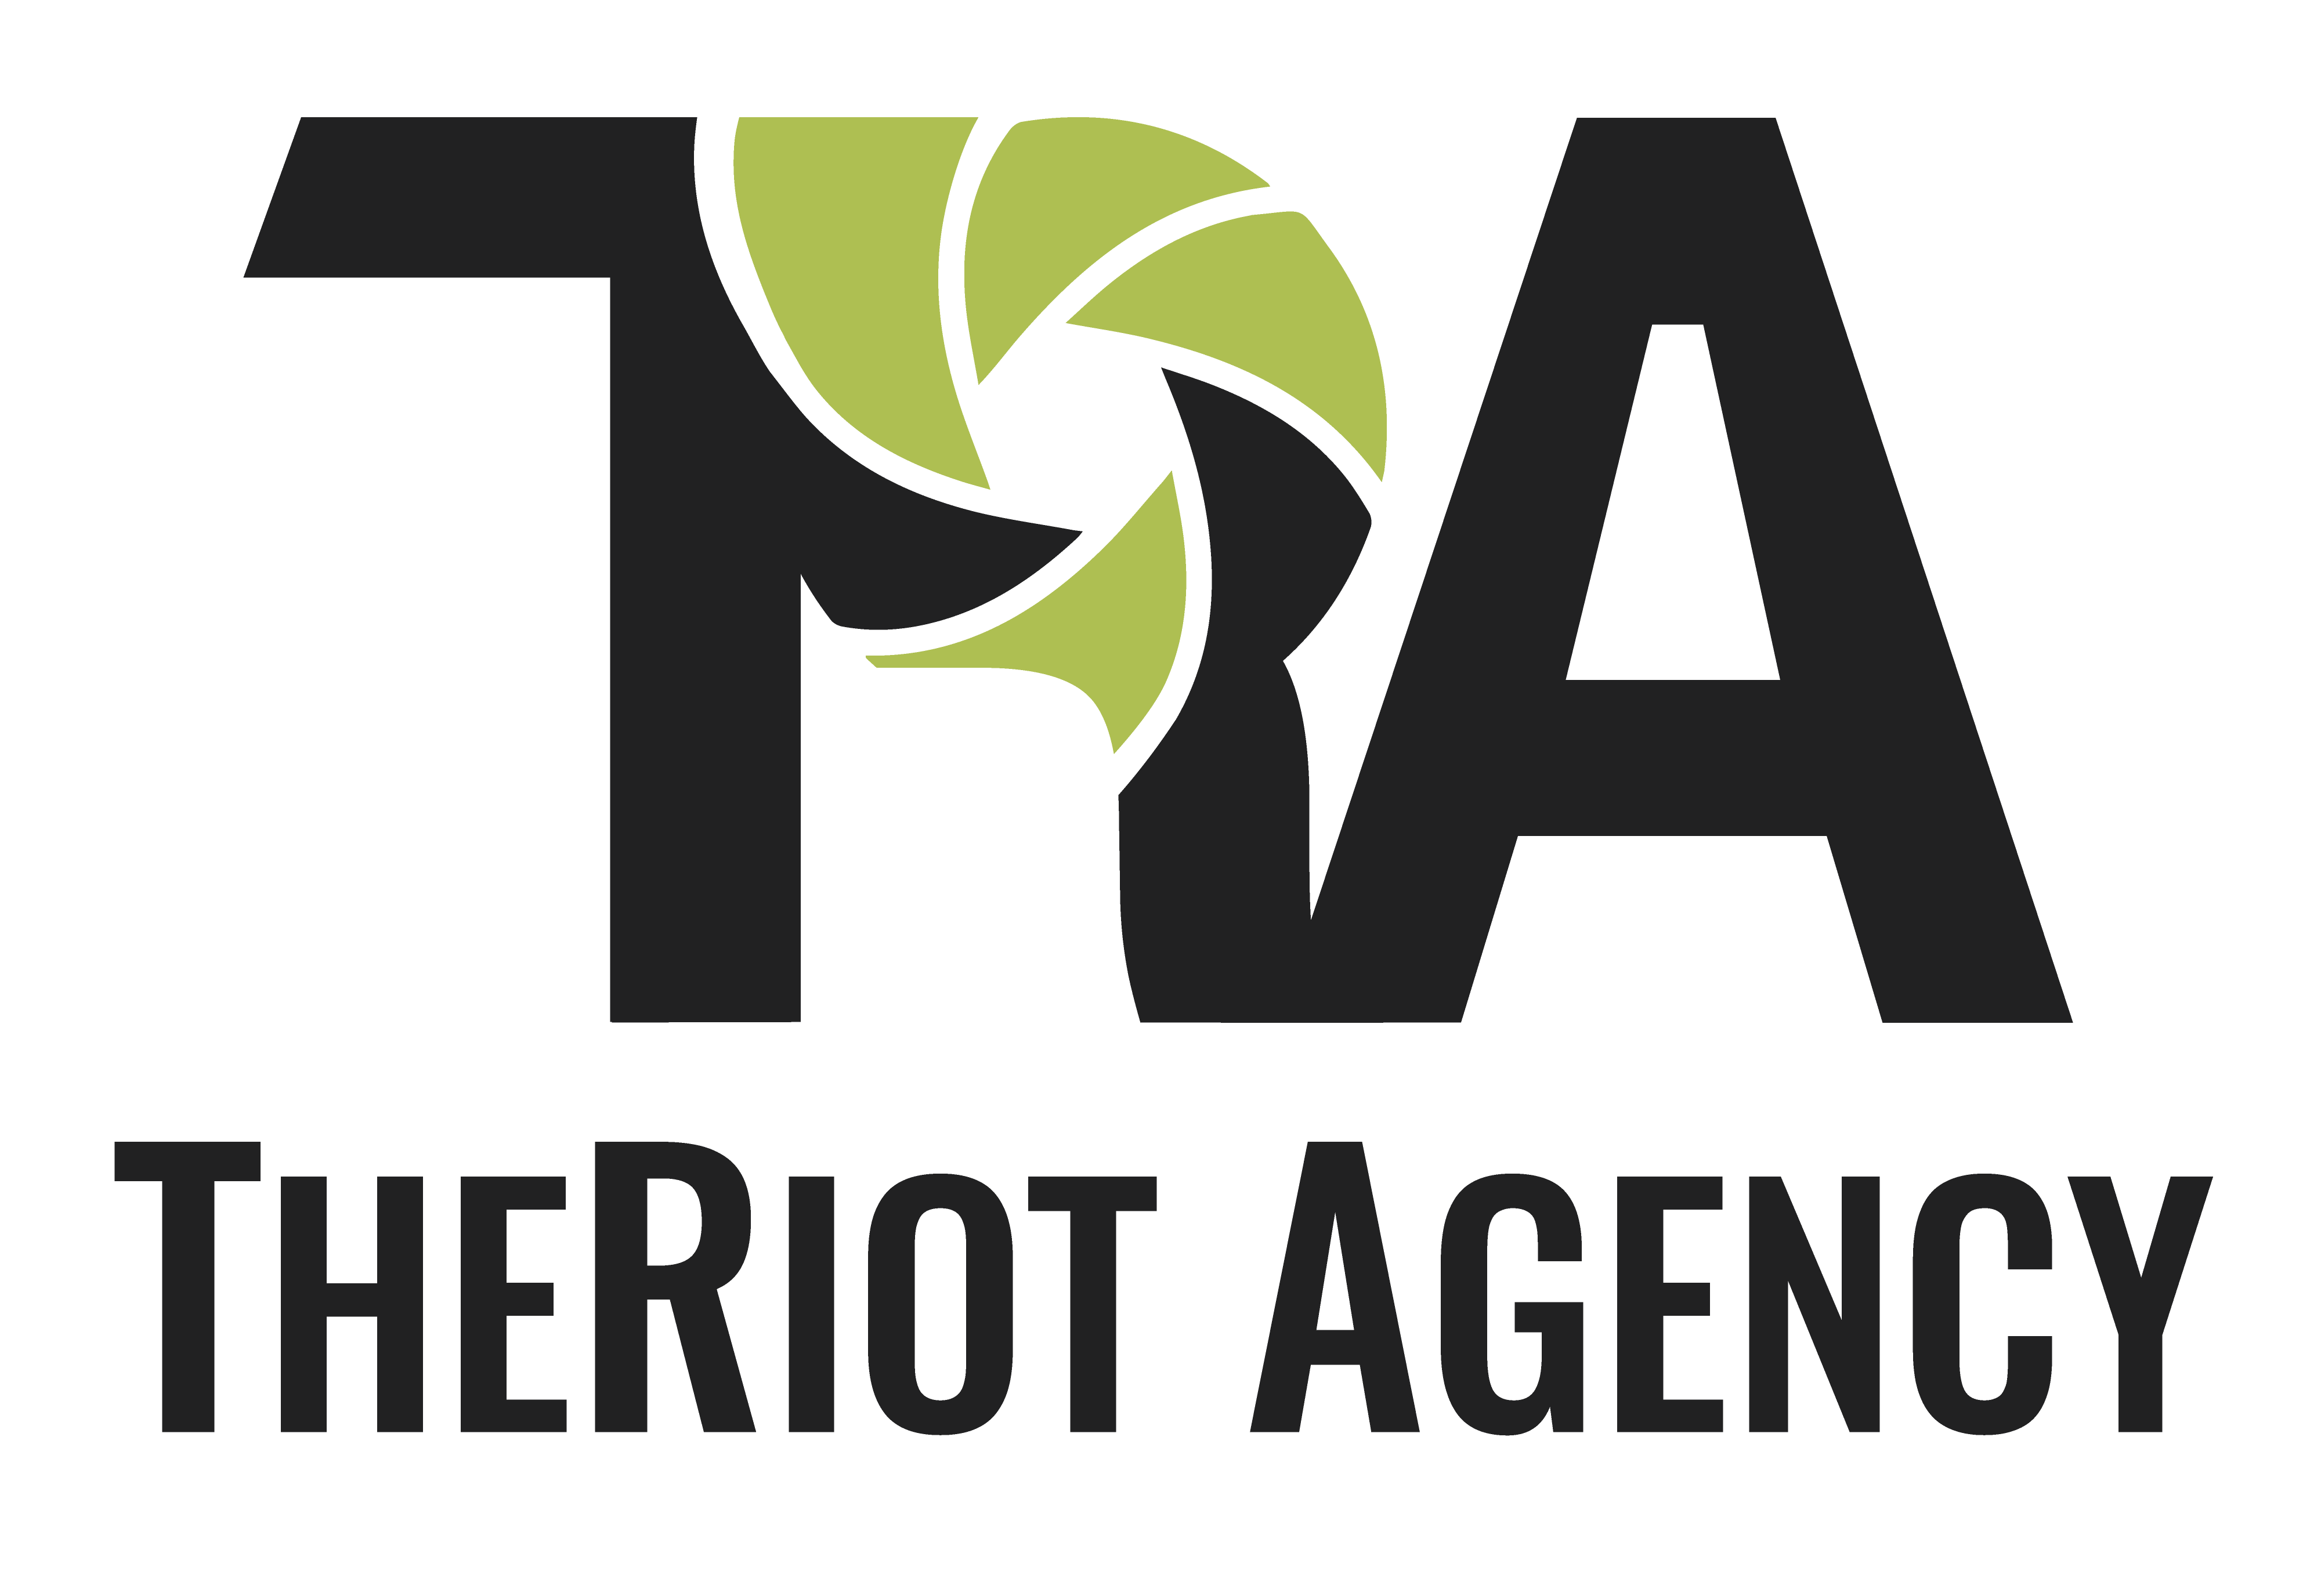 TheRiot Agency